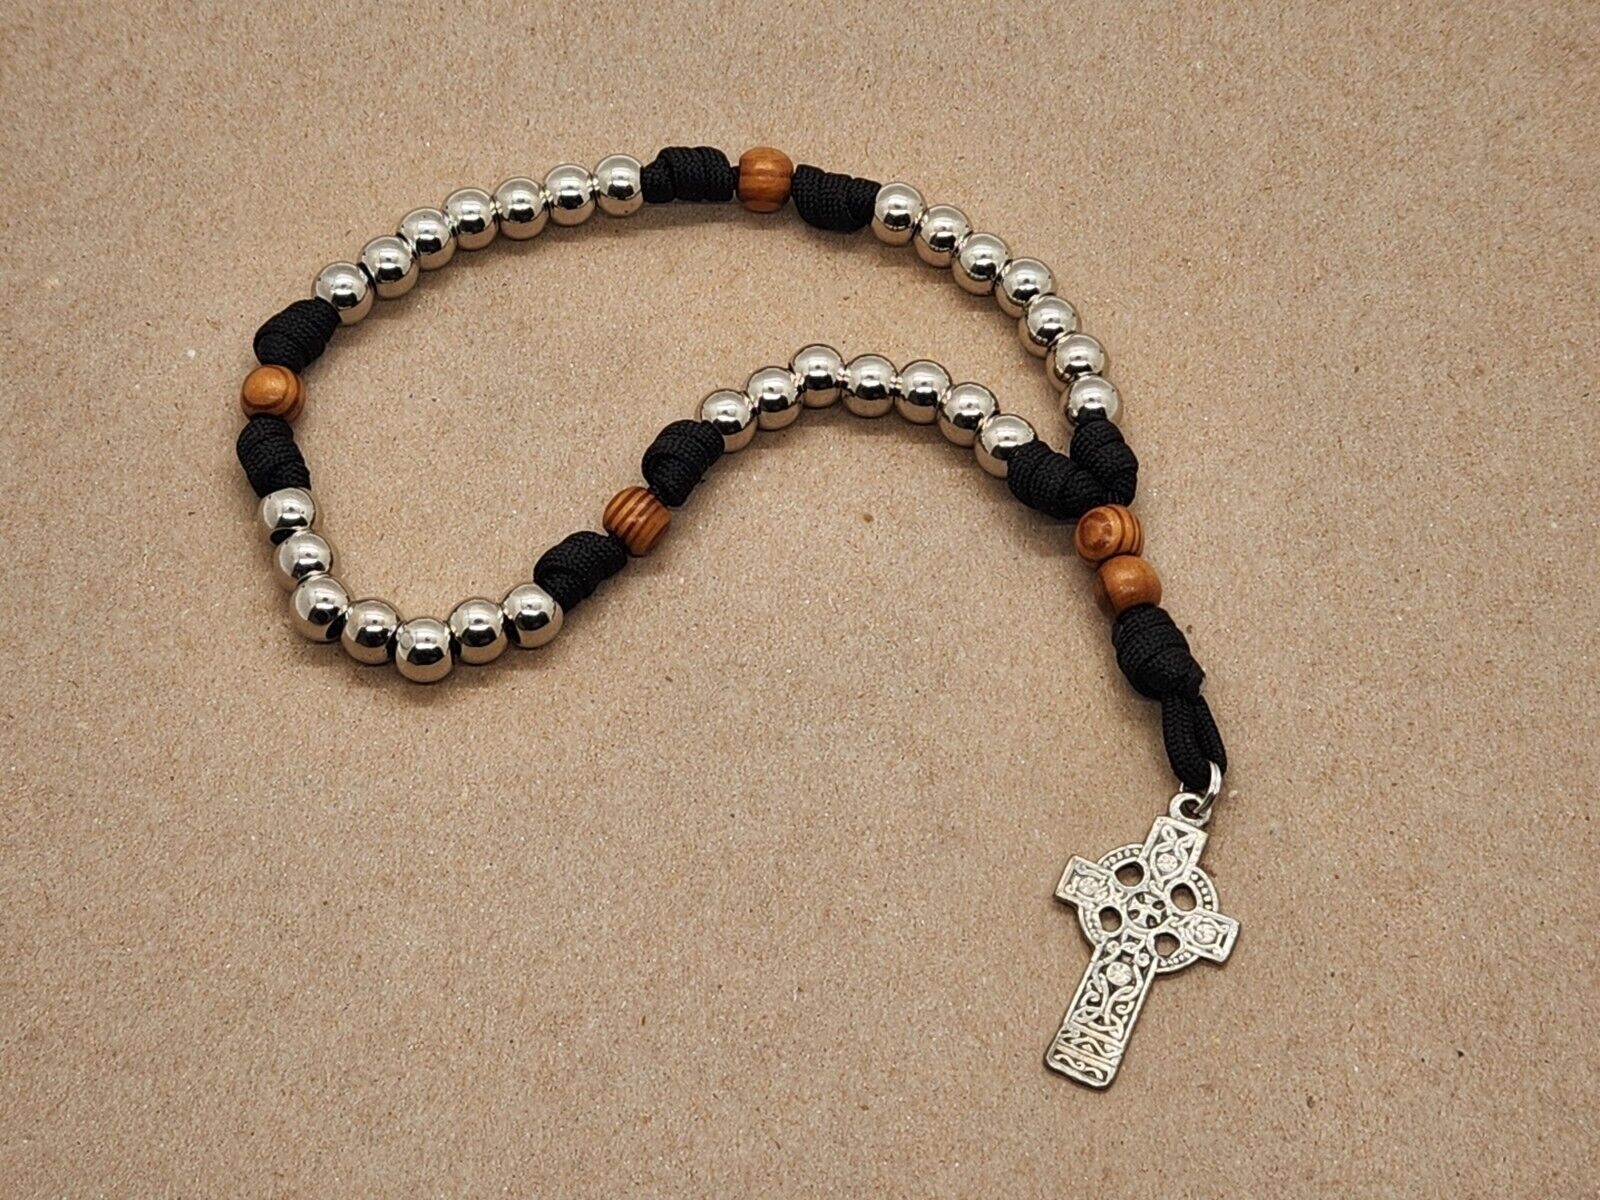 Paracord Anglican rosary, Celtic cross Protestant prayer beads